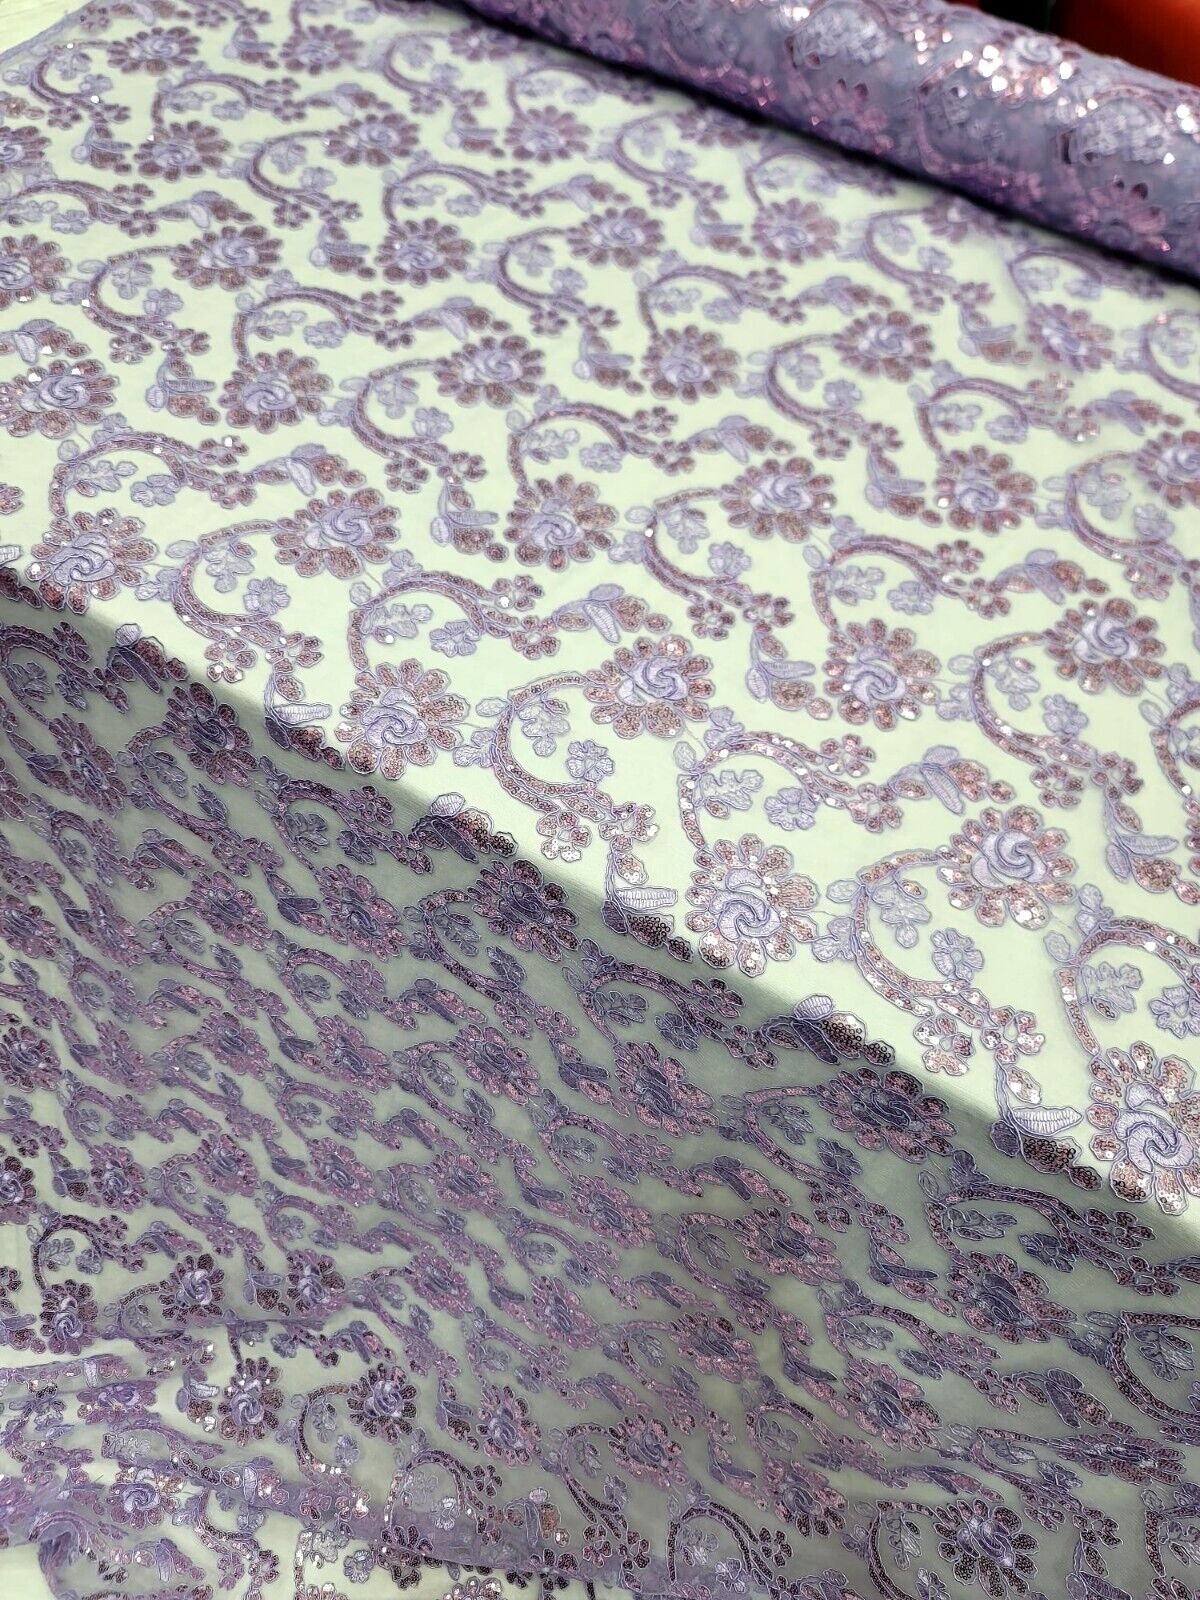 Lavender Lace Corded Flower Embroidery Sequins Mesh Fabric - Sold By the Yard - For Dress